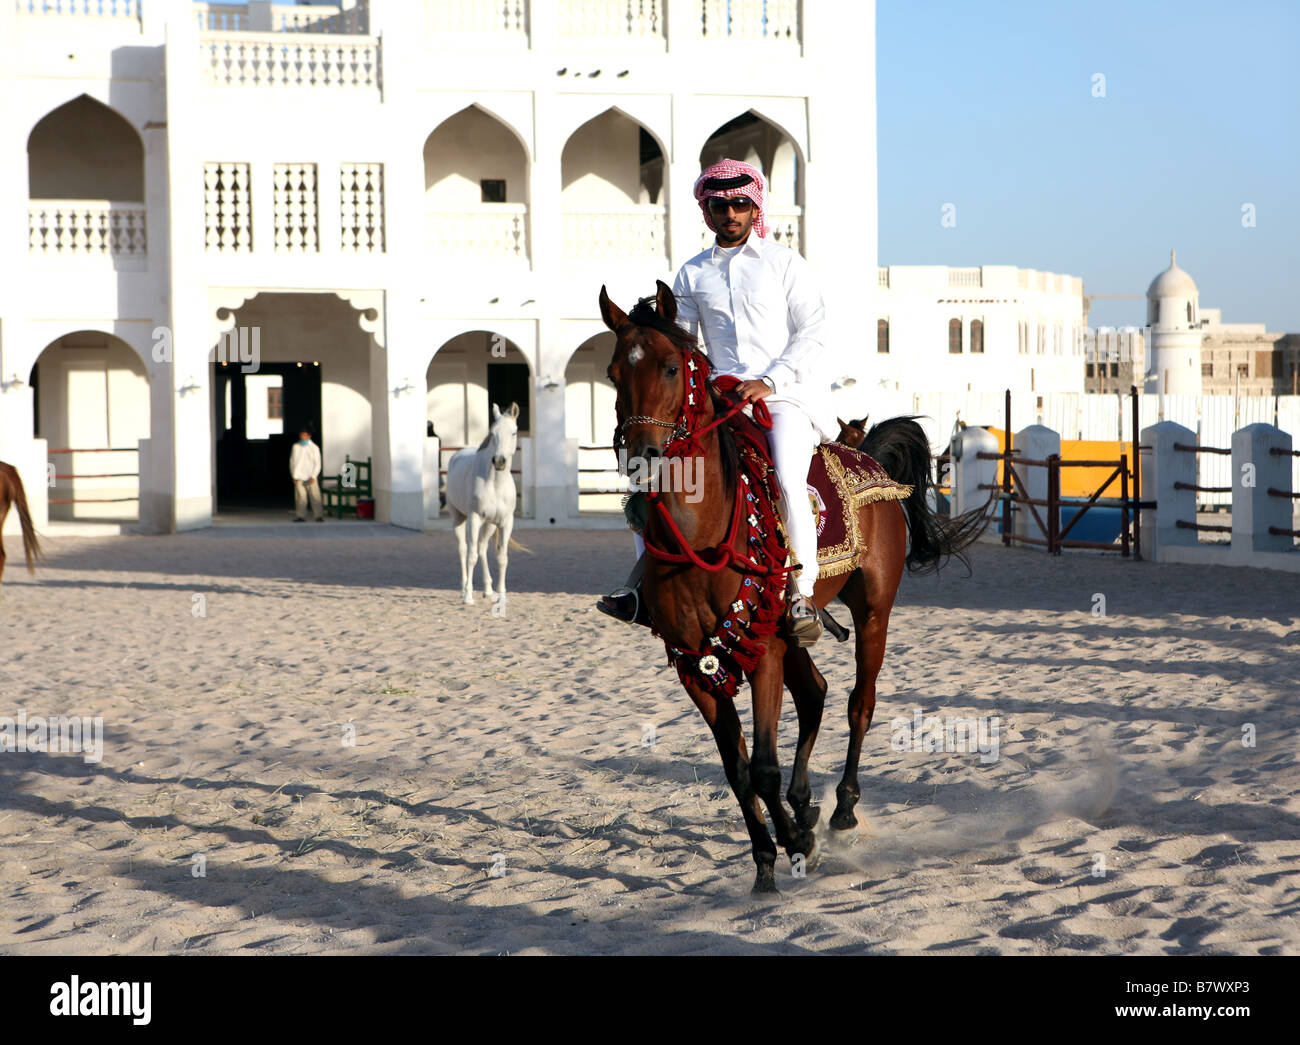 A rider shows off a pure bred Arab stallion its saddle adorned with the State of Qatar arms in central Doha, Qatar Stock Photo